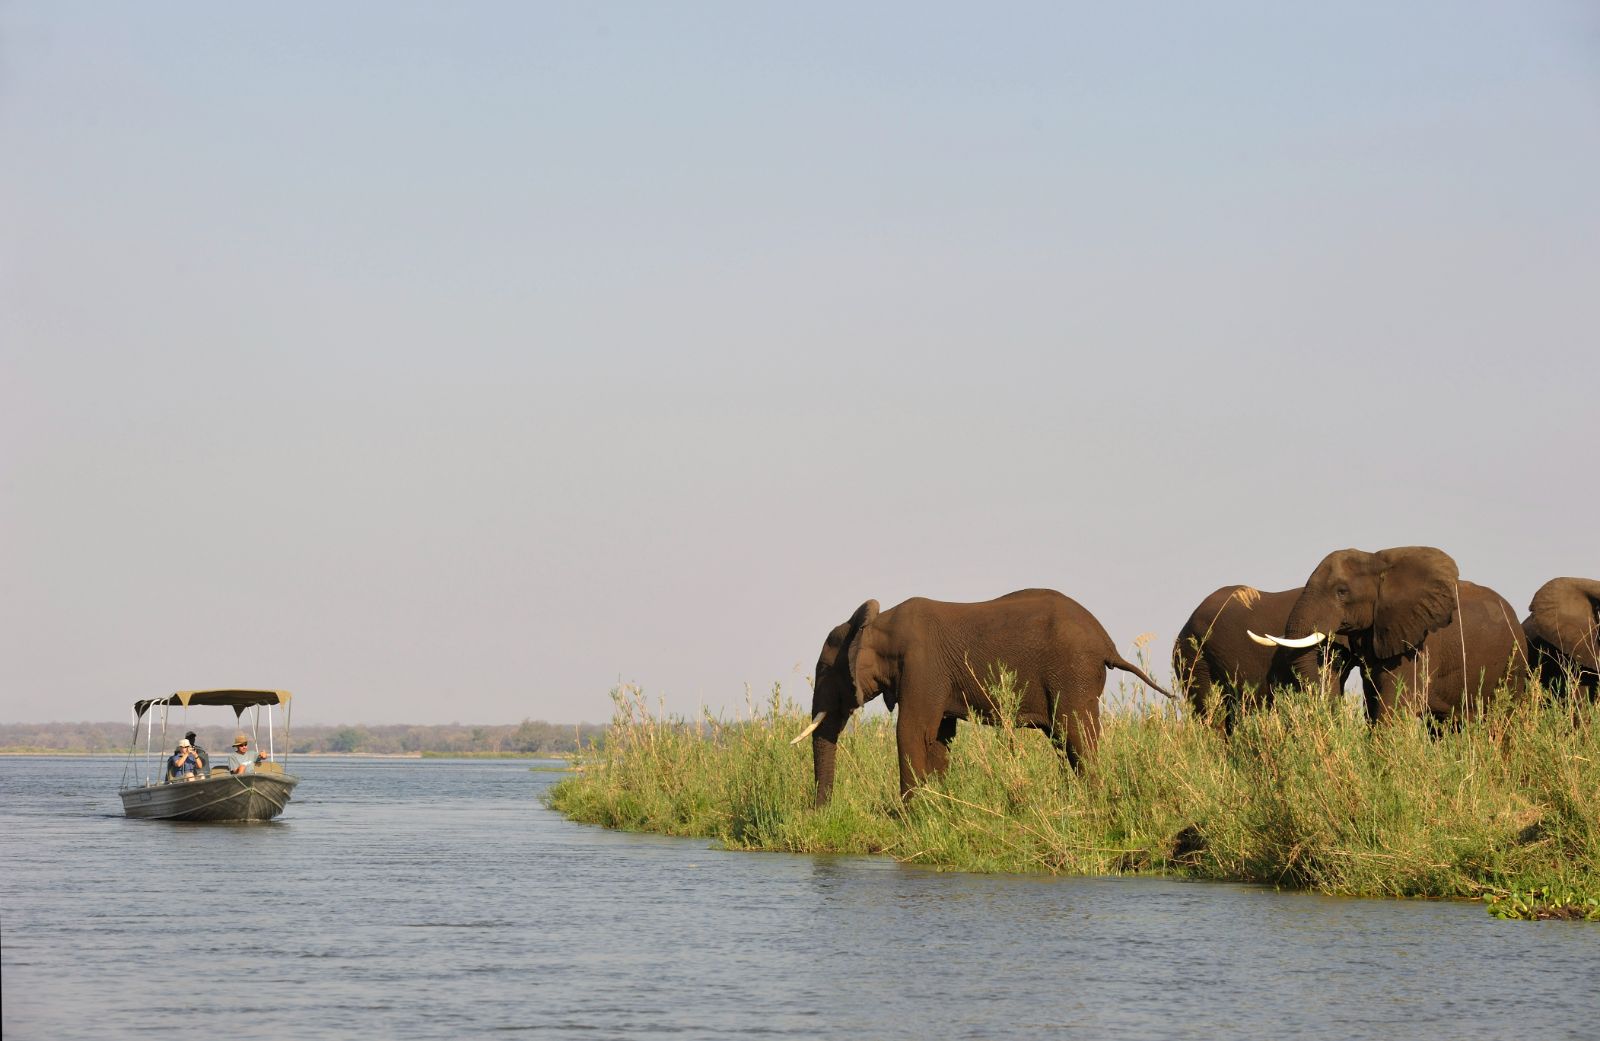 Elephants spotted on a river safari on the grounds of Old Mondoro in the Lower Zambezi National Park